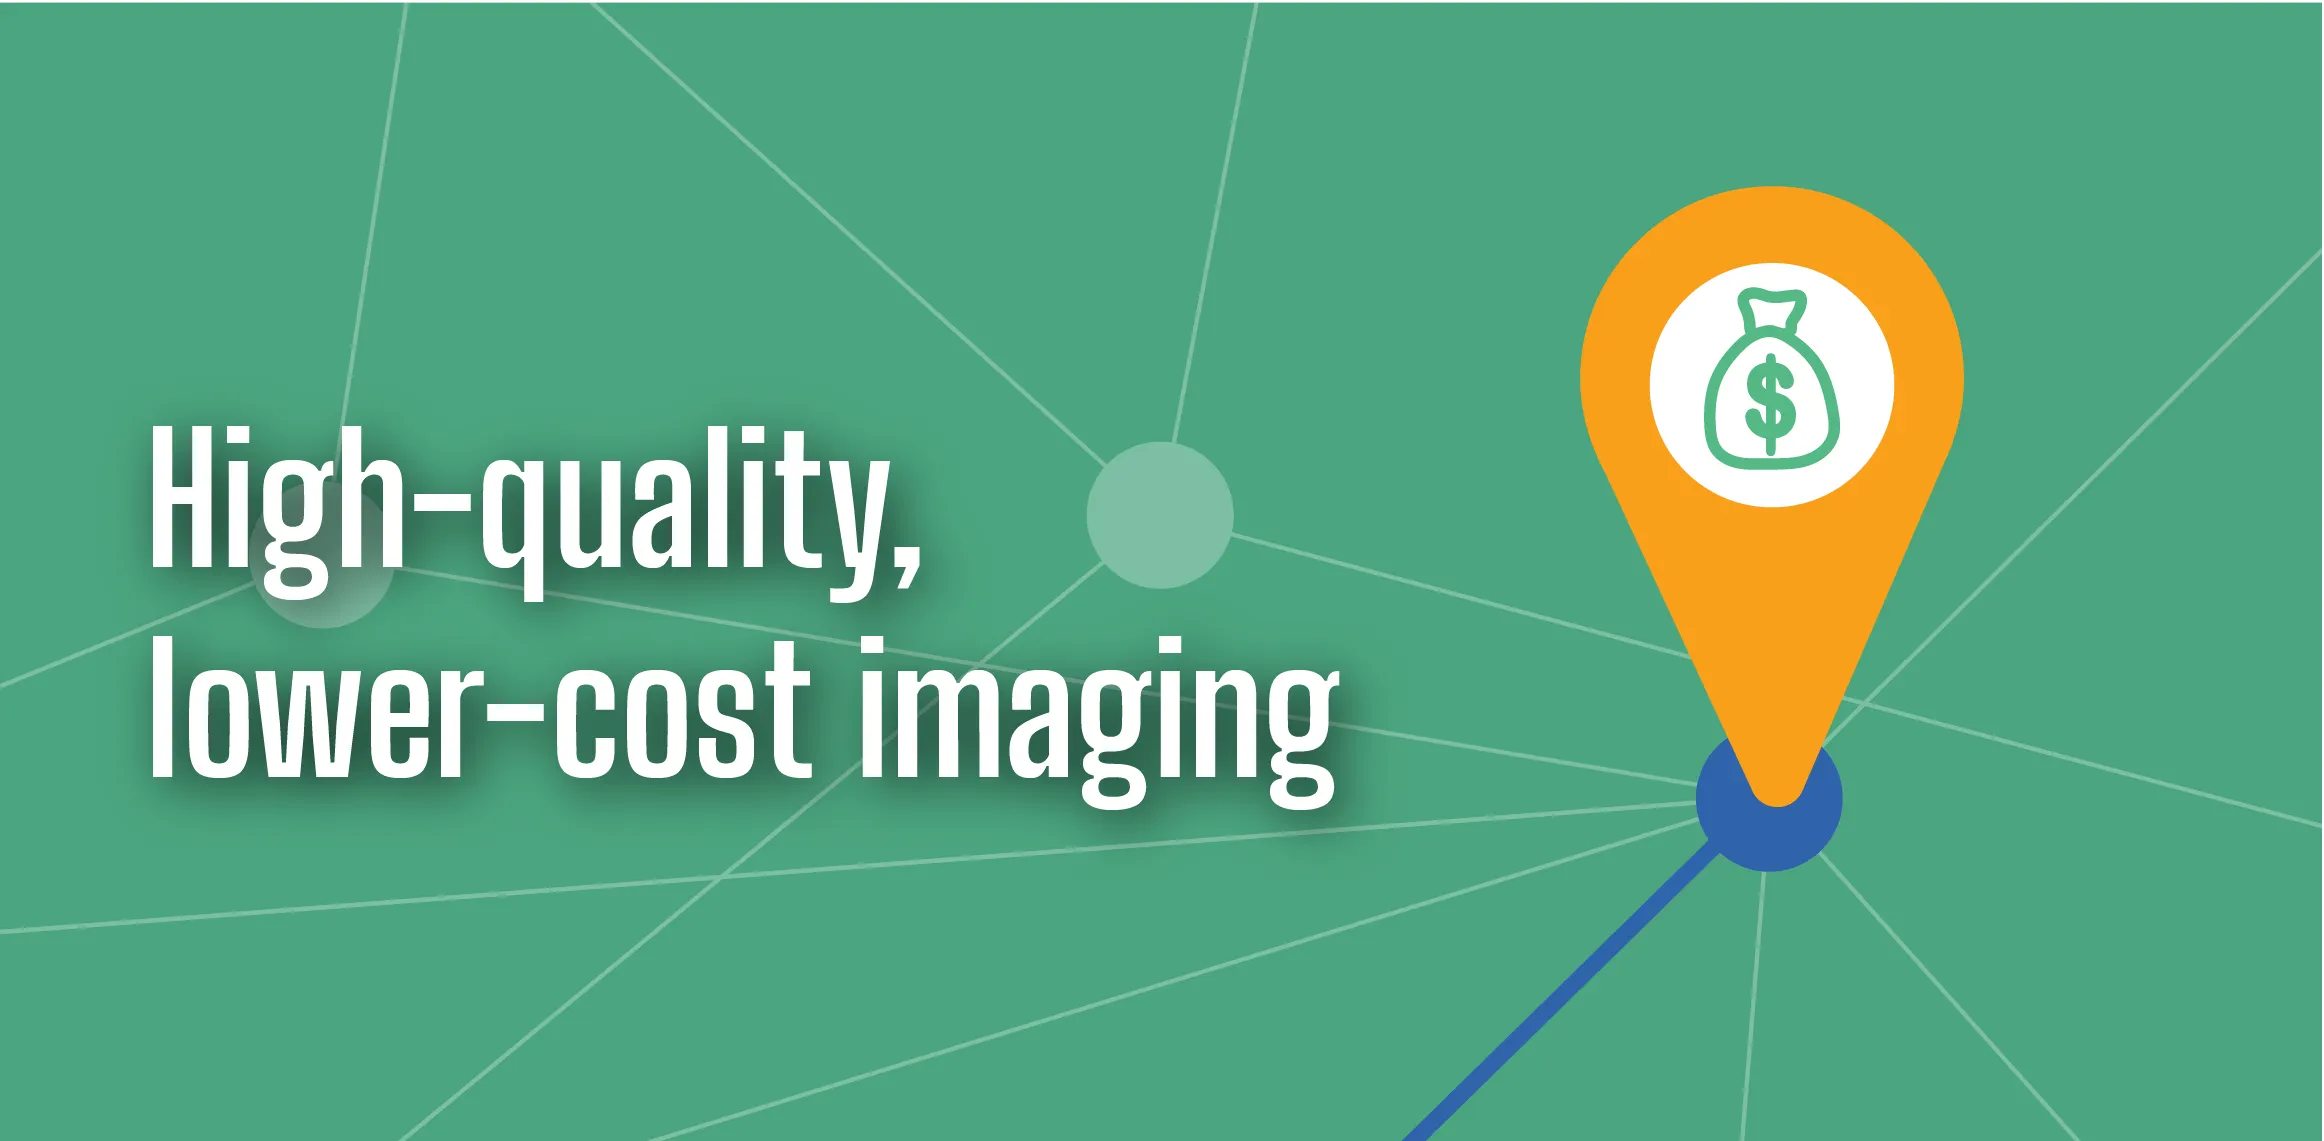 Maryland High-quality, lower-cost Imaging